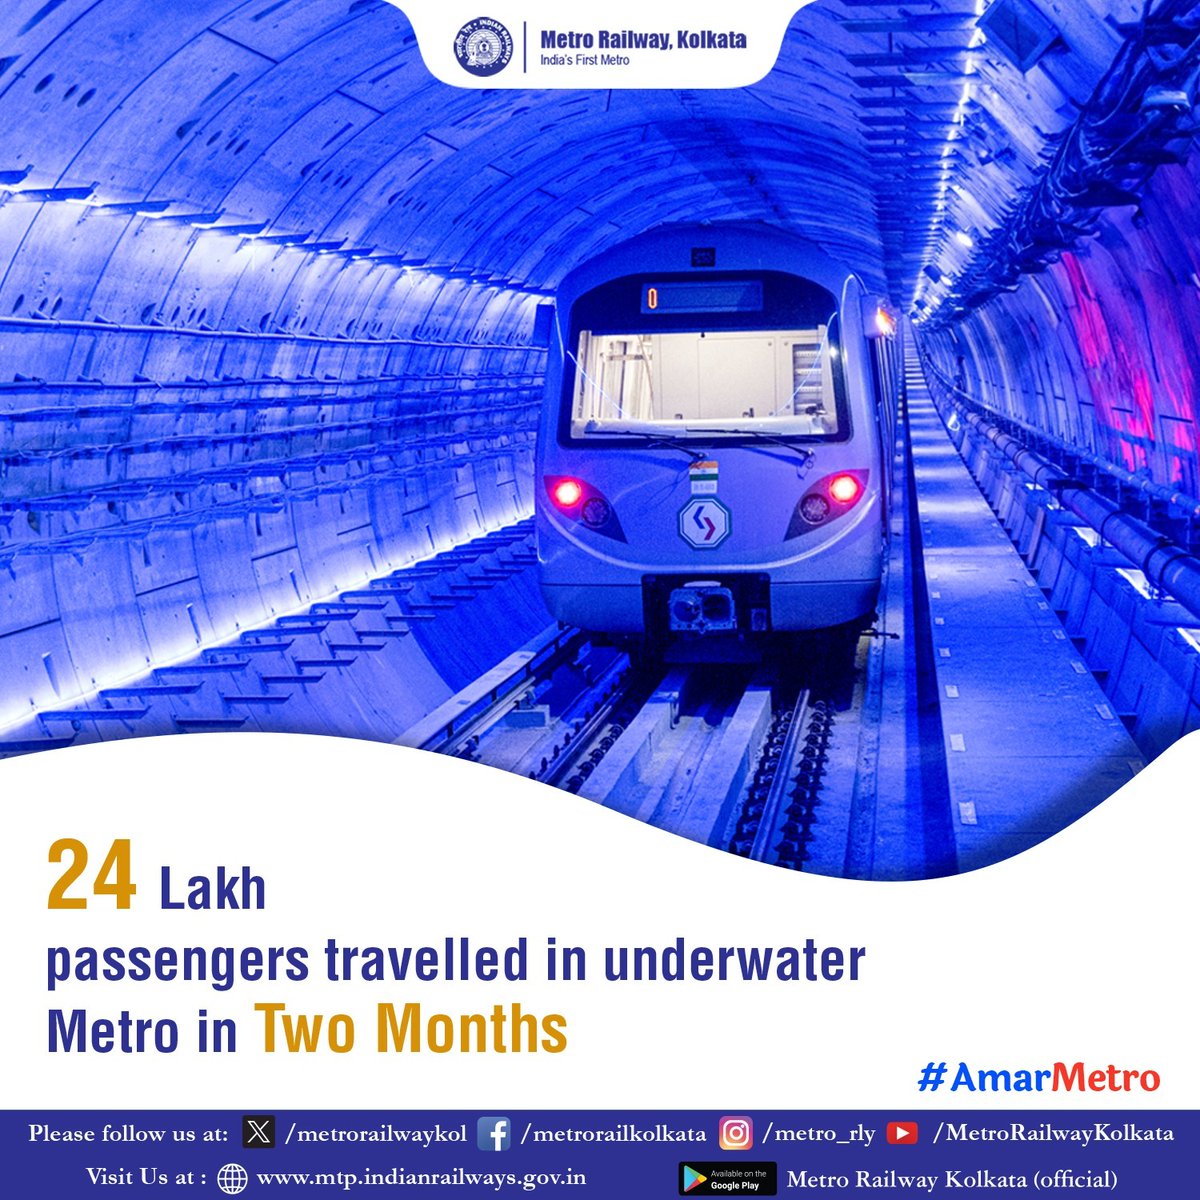 24 Lakh passengers travelled in the underwater Metro in Two months. Thank you very much for your co-operation!